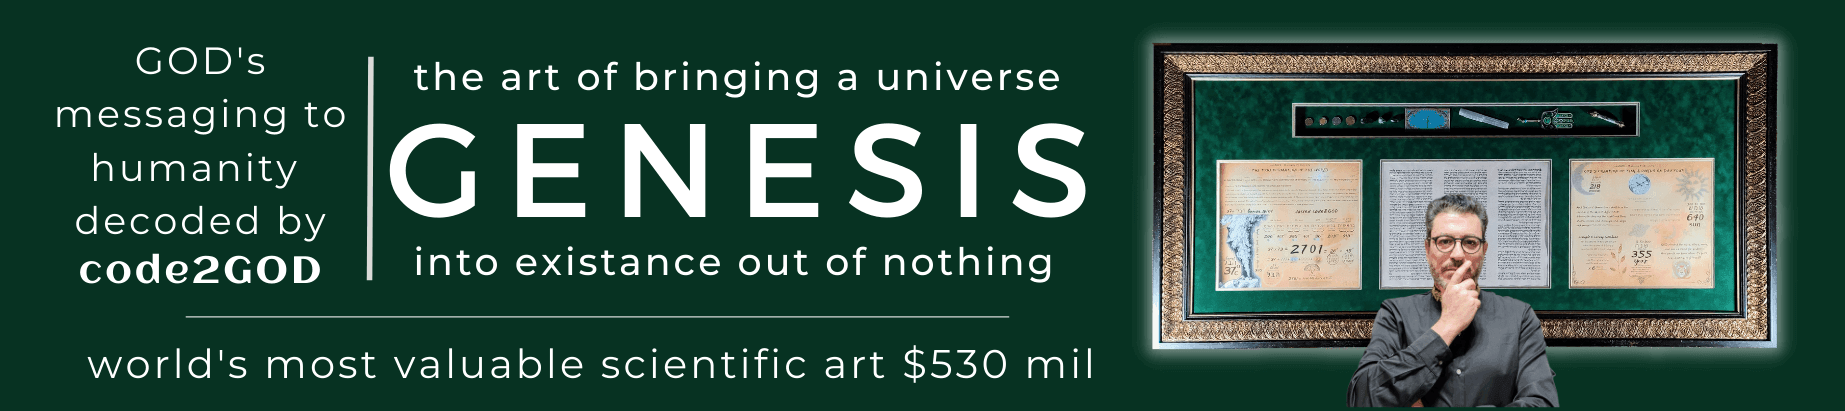 Genesis - the art of bringing a universe into existence out of nothing. World's most valuable scientificart $530 million by Don Juravin